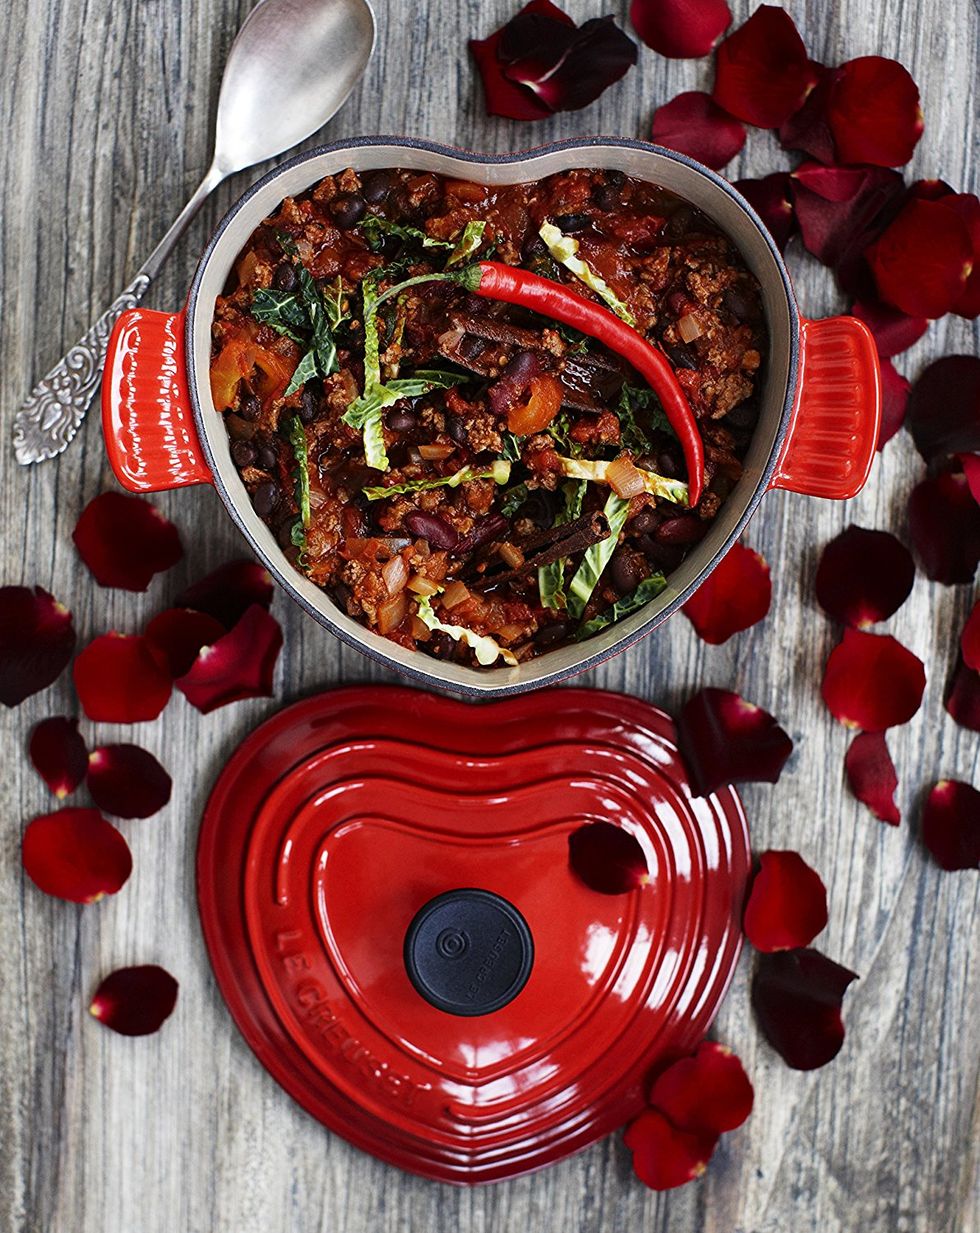 Le Creuset launched a heart-shaped casserole dish collection for  Valentine's Day